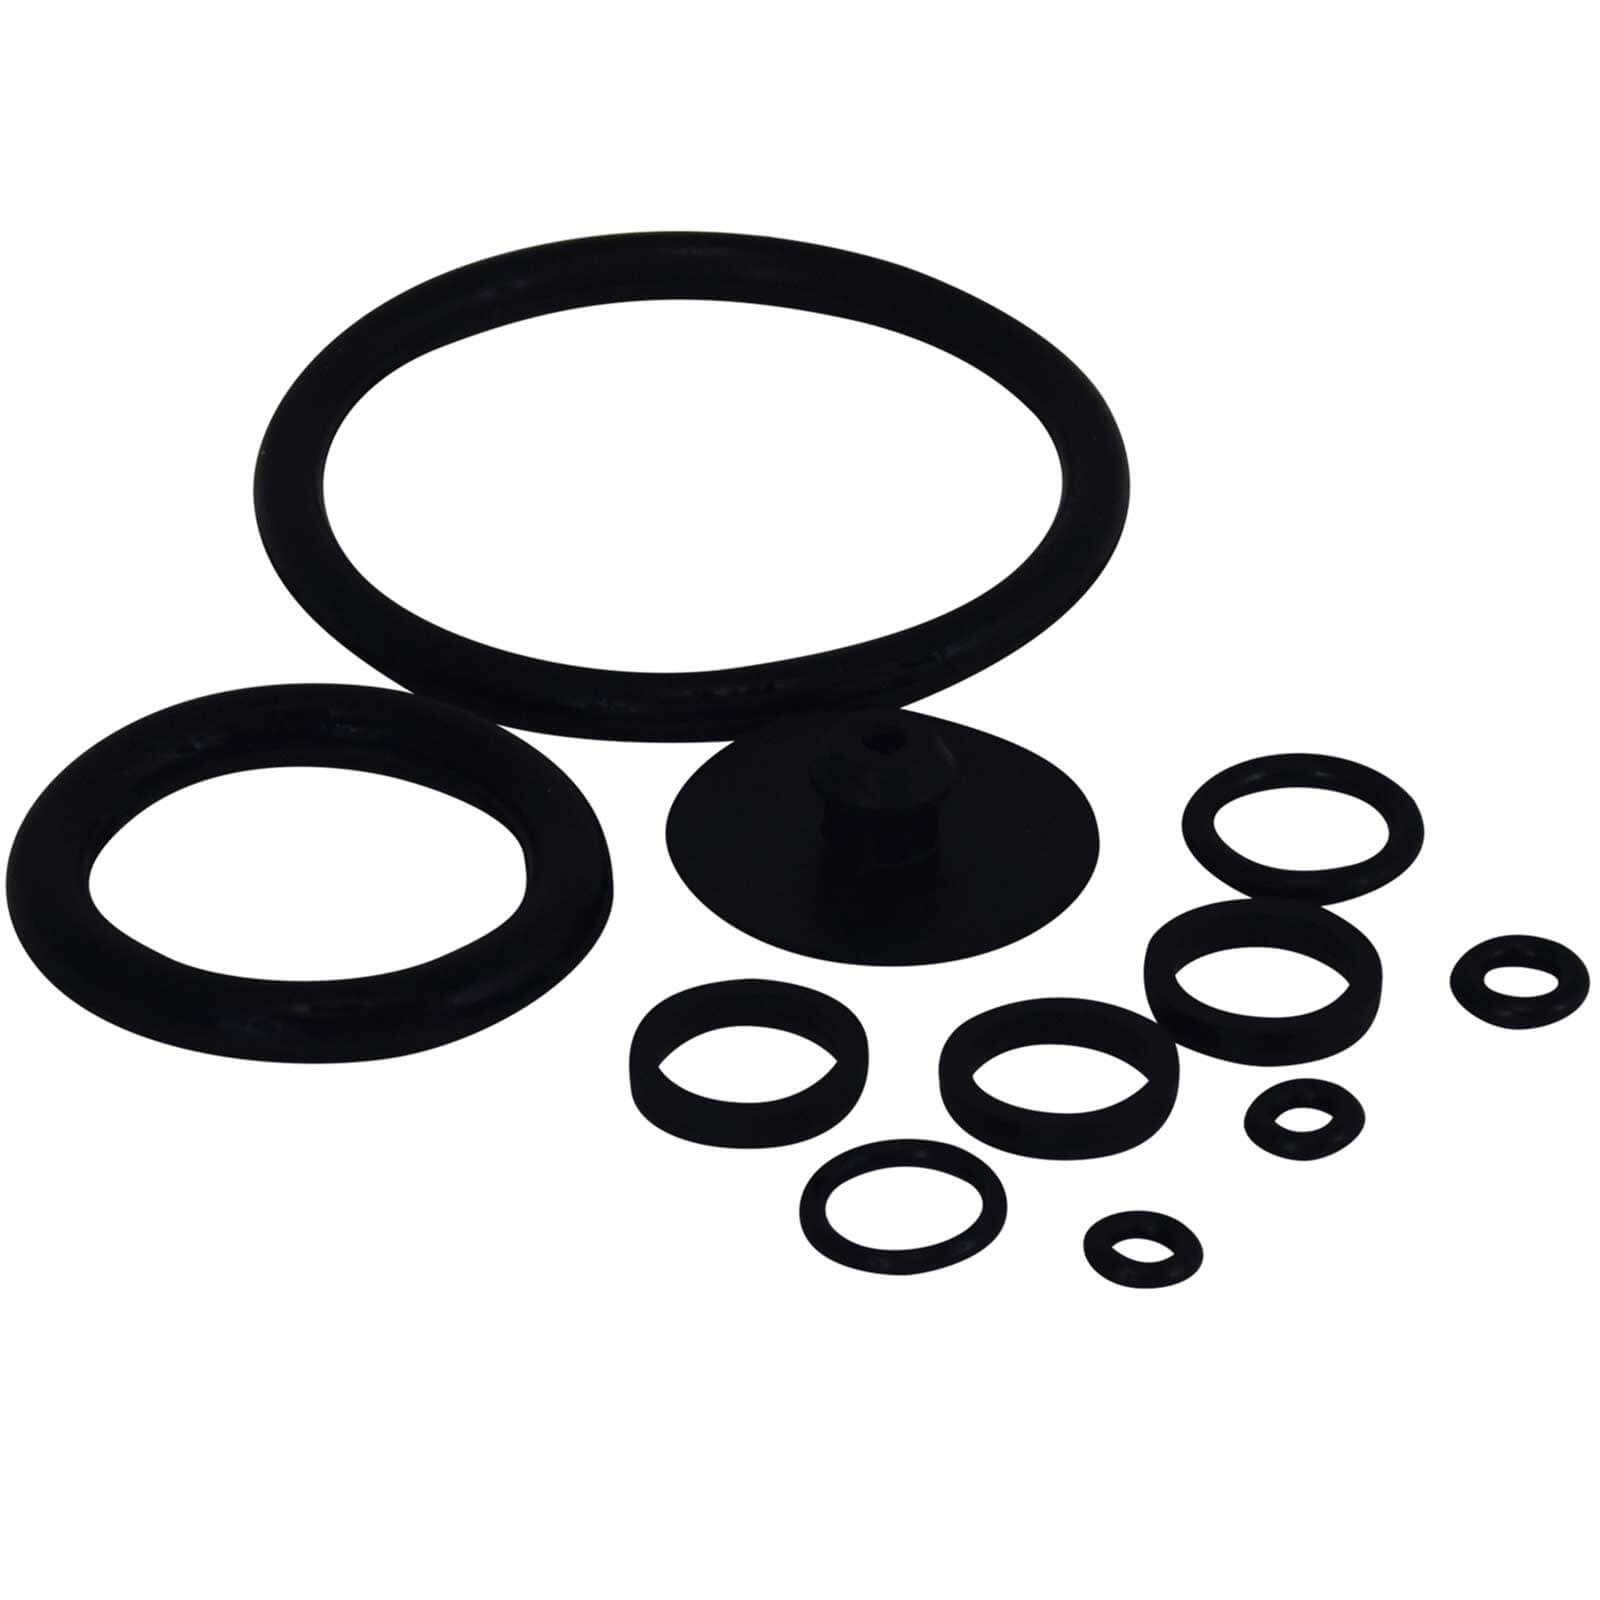 Image of Spear and Jackson Replacement O Rings for 5l and 8l Pressure Sprayers